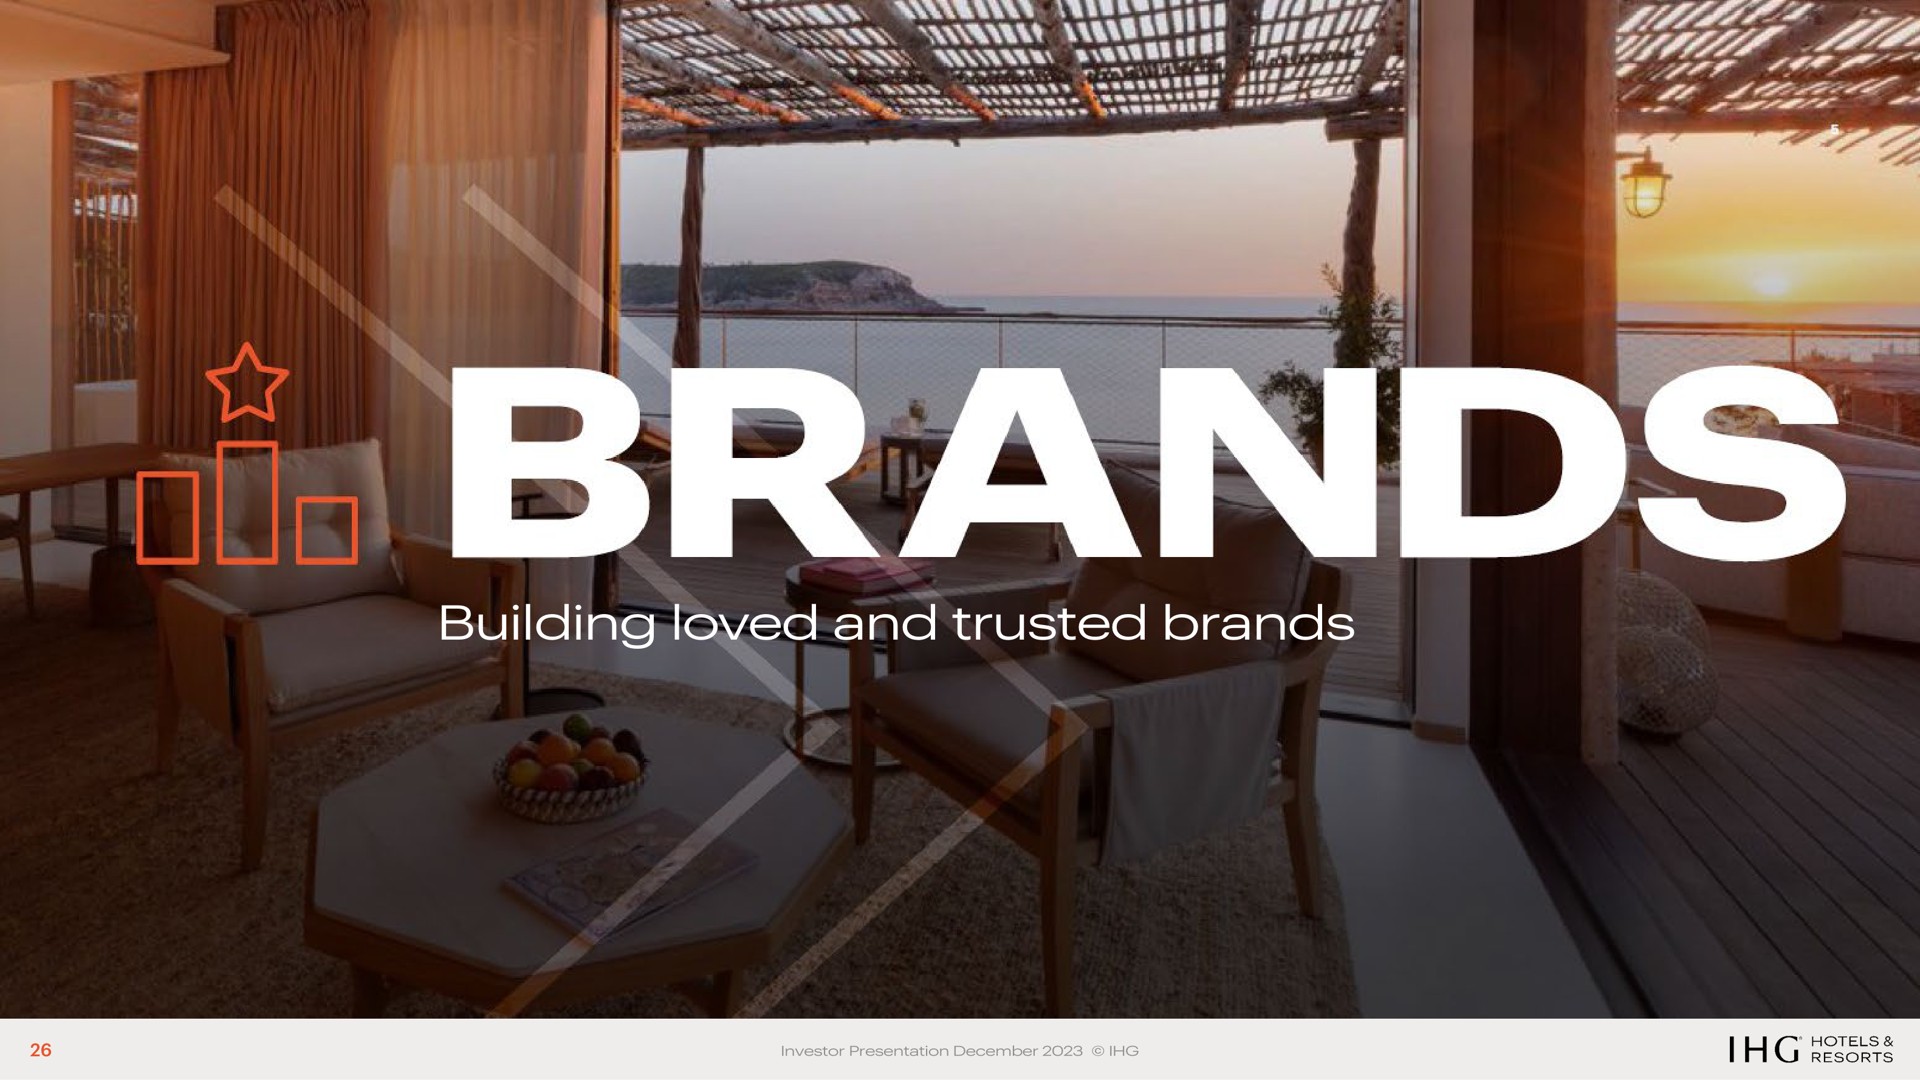 building loved and trusted brands and | IHG Hotels